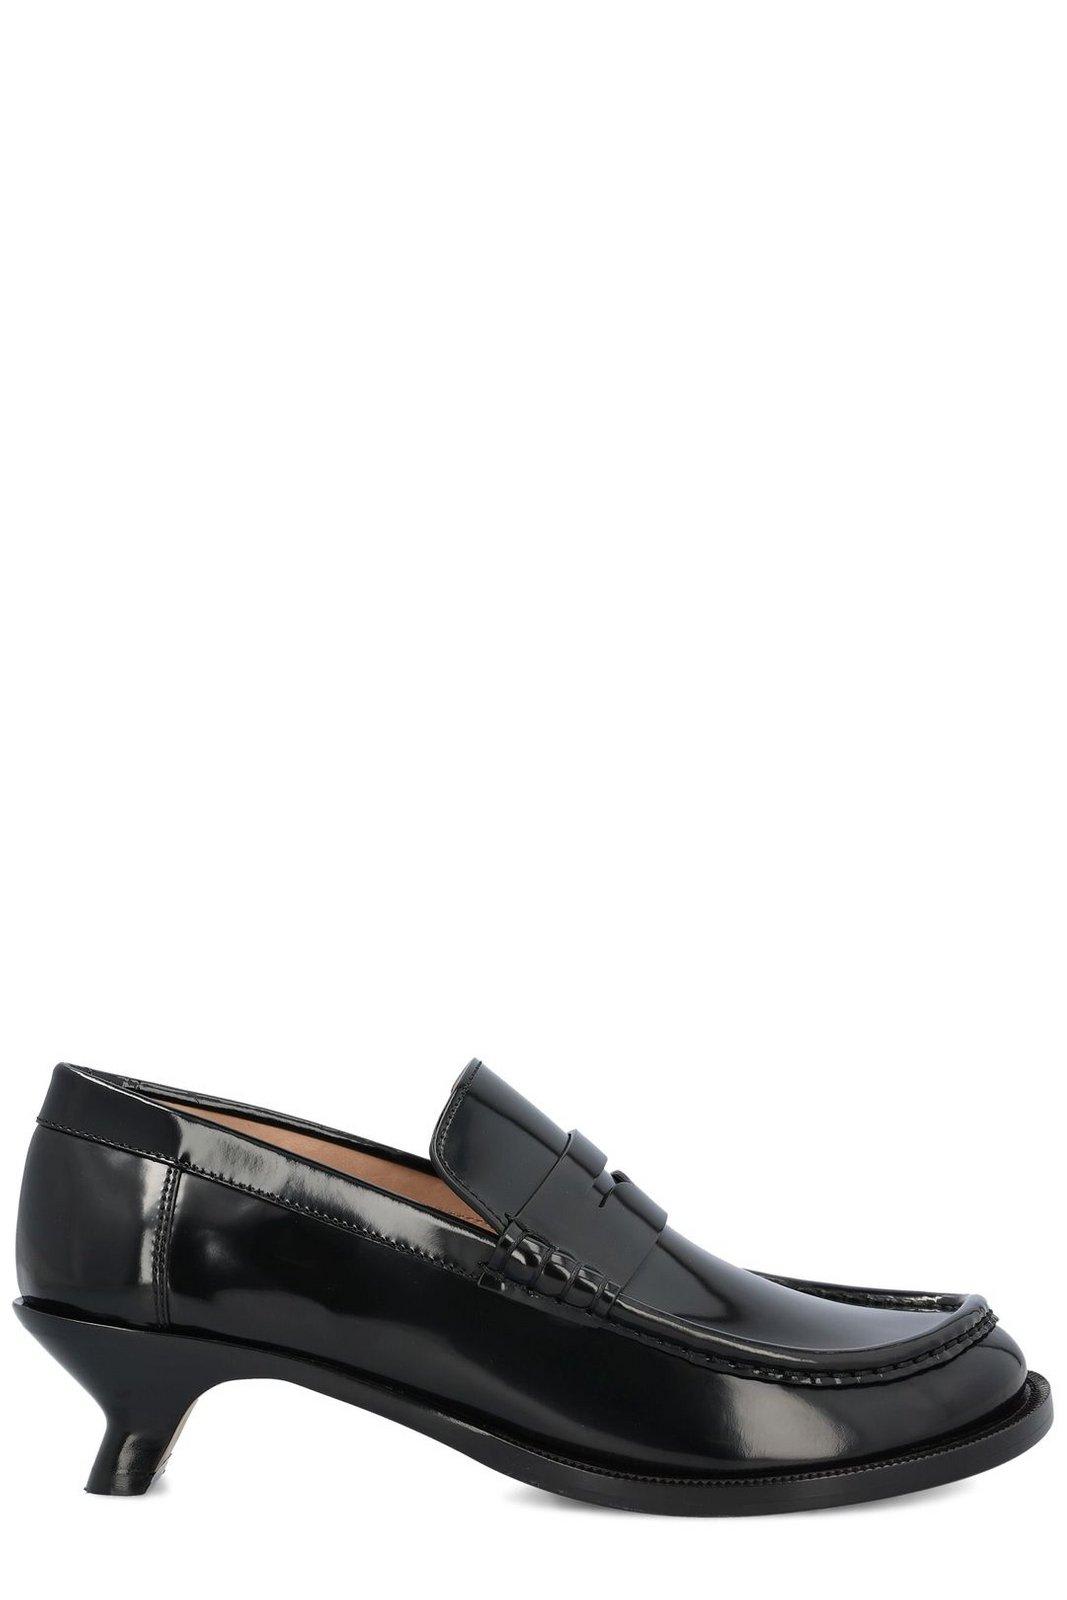 LOEWE CAMPO SLIP-ON LOAFERS